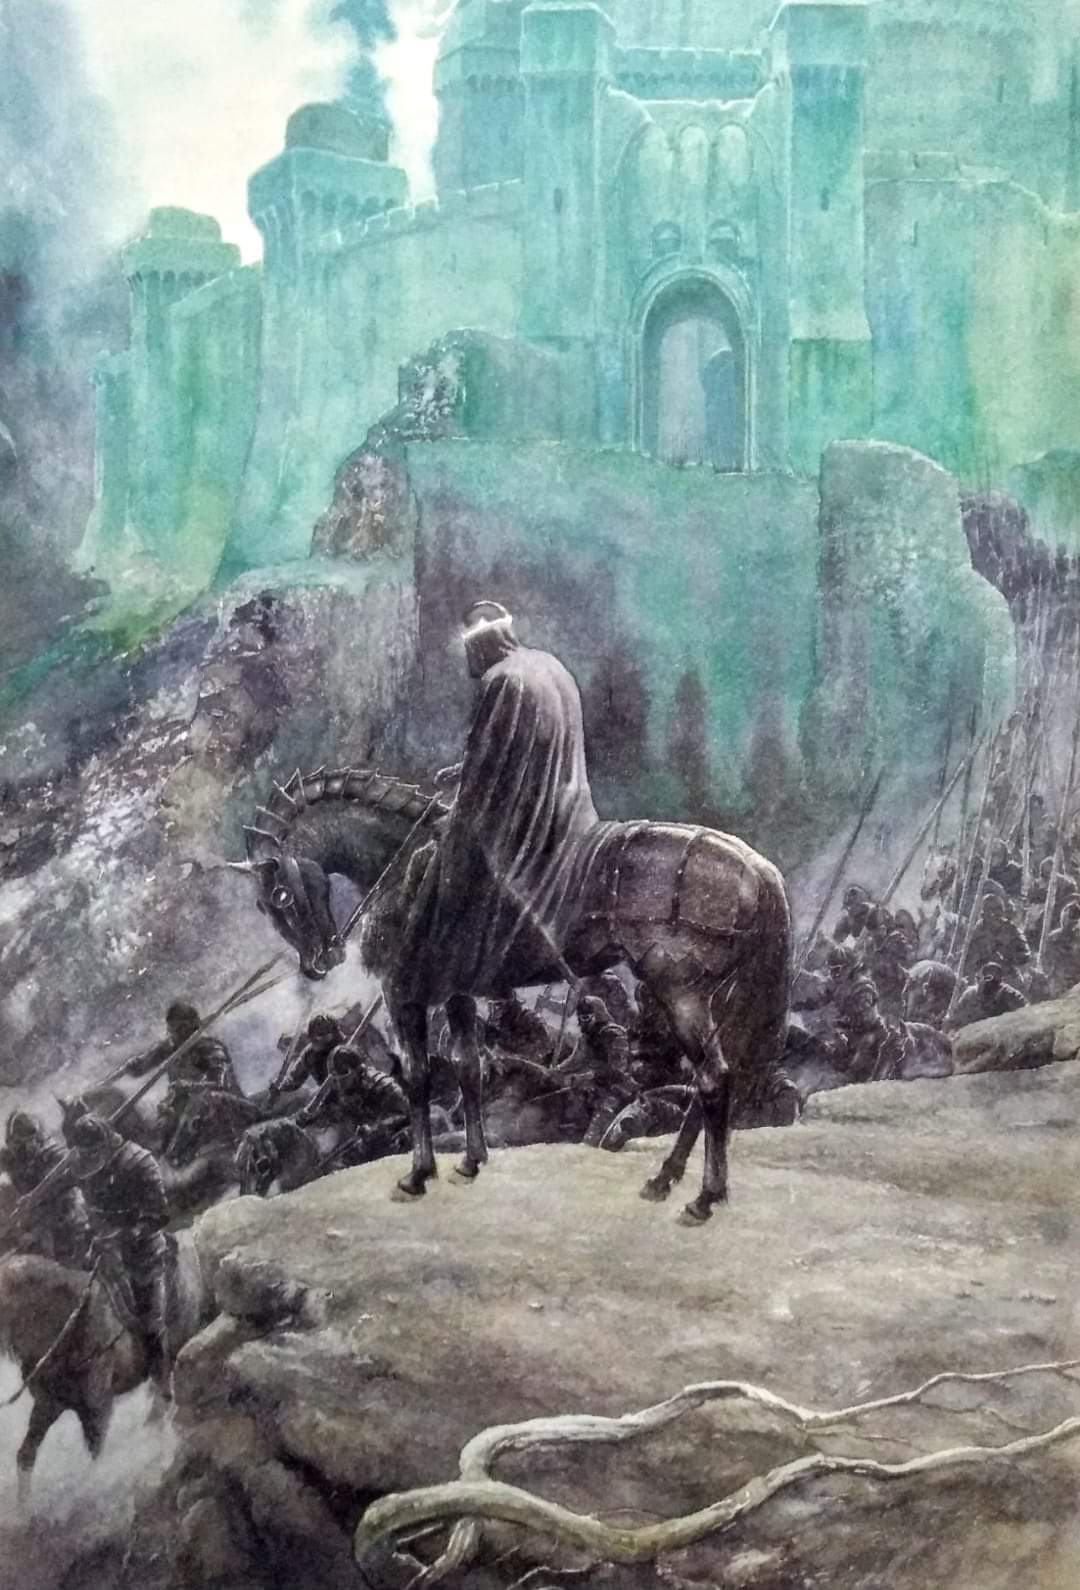 The Witch King of Angmar. Upvote if you want more wallpaper